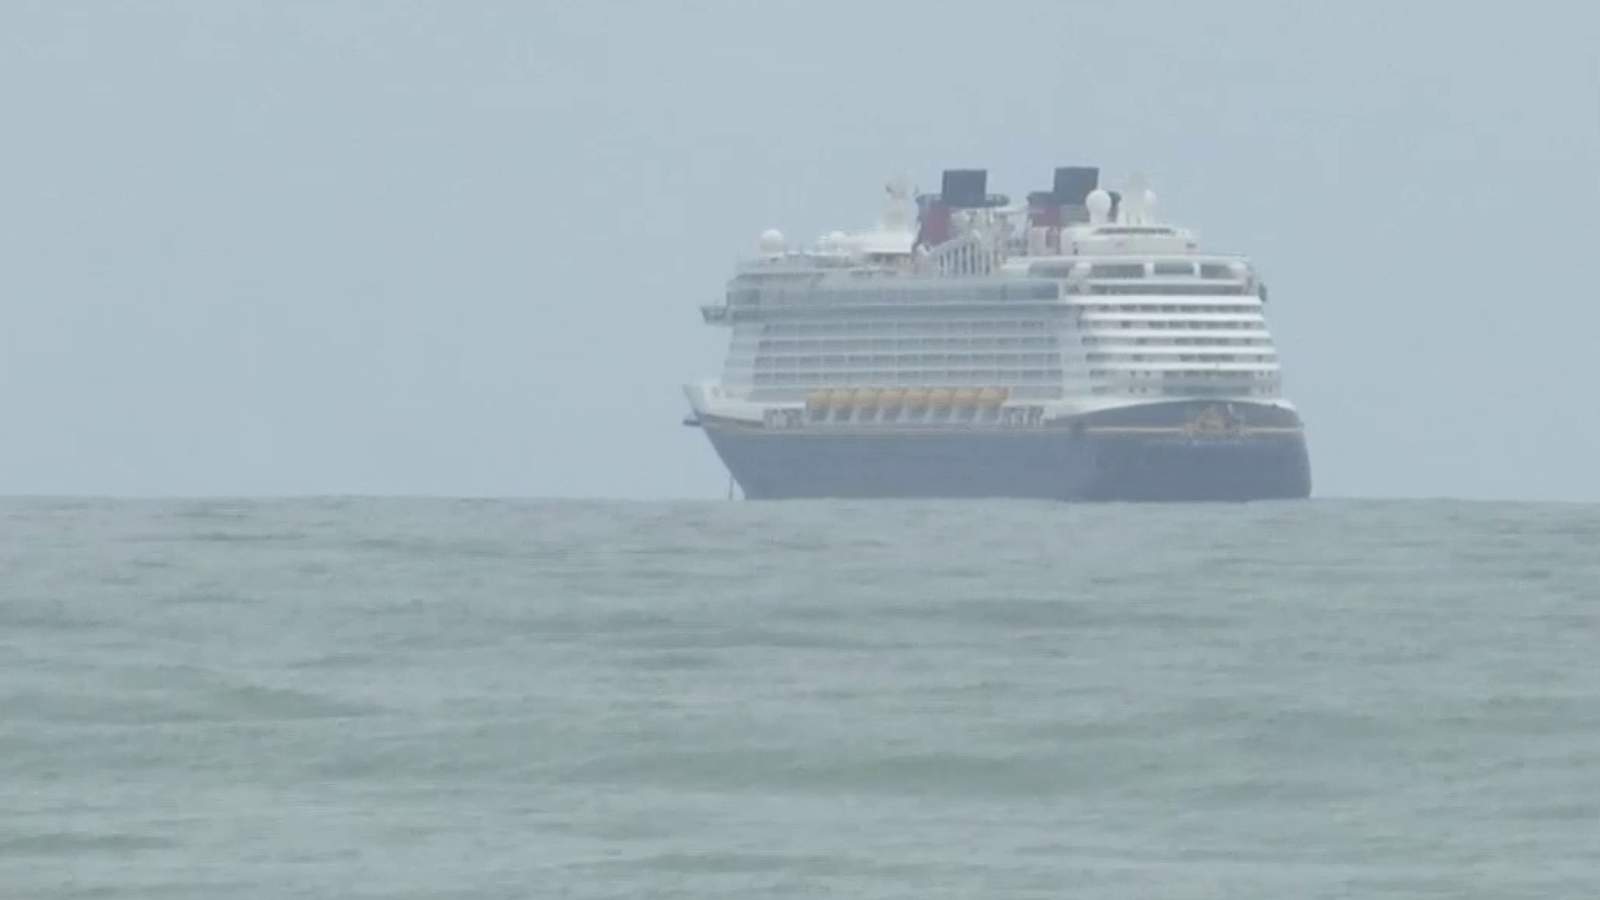 Coronavirus: Here’s why cruise ships are meandering off Port Canaveral